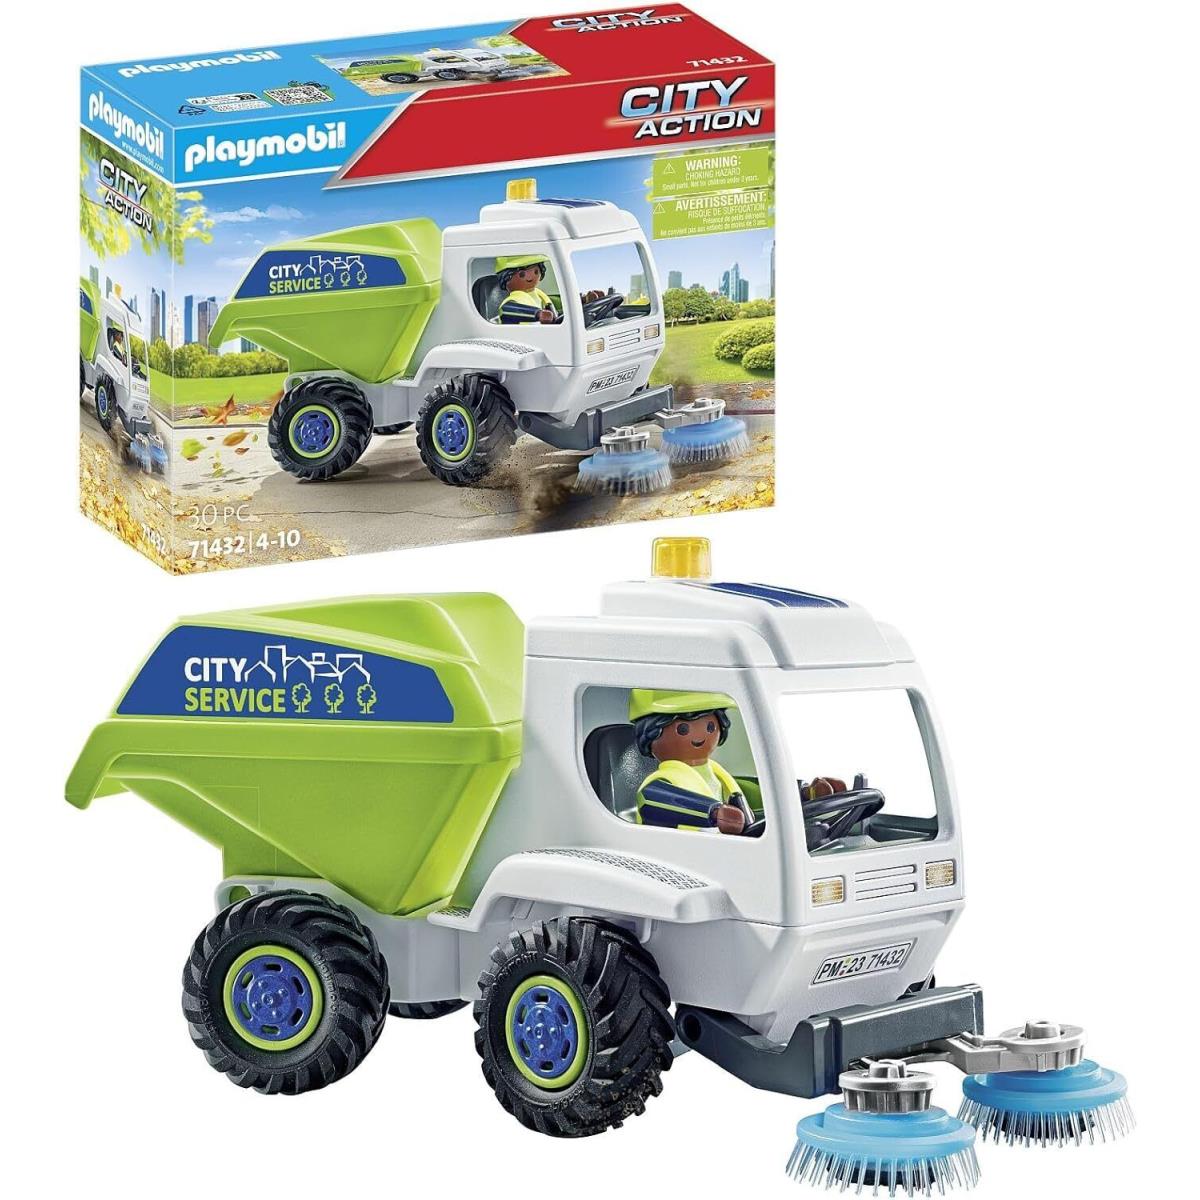 Playmobil City Action Road Sweeper - 71432